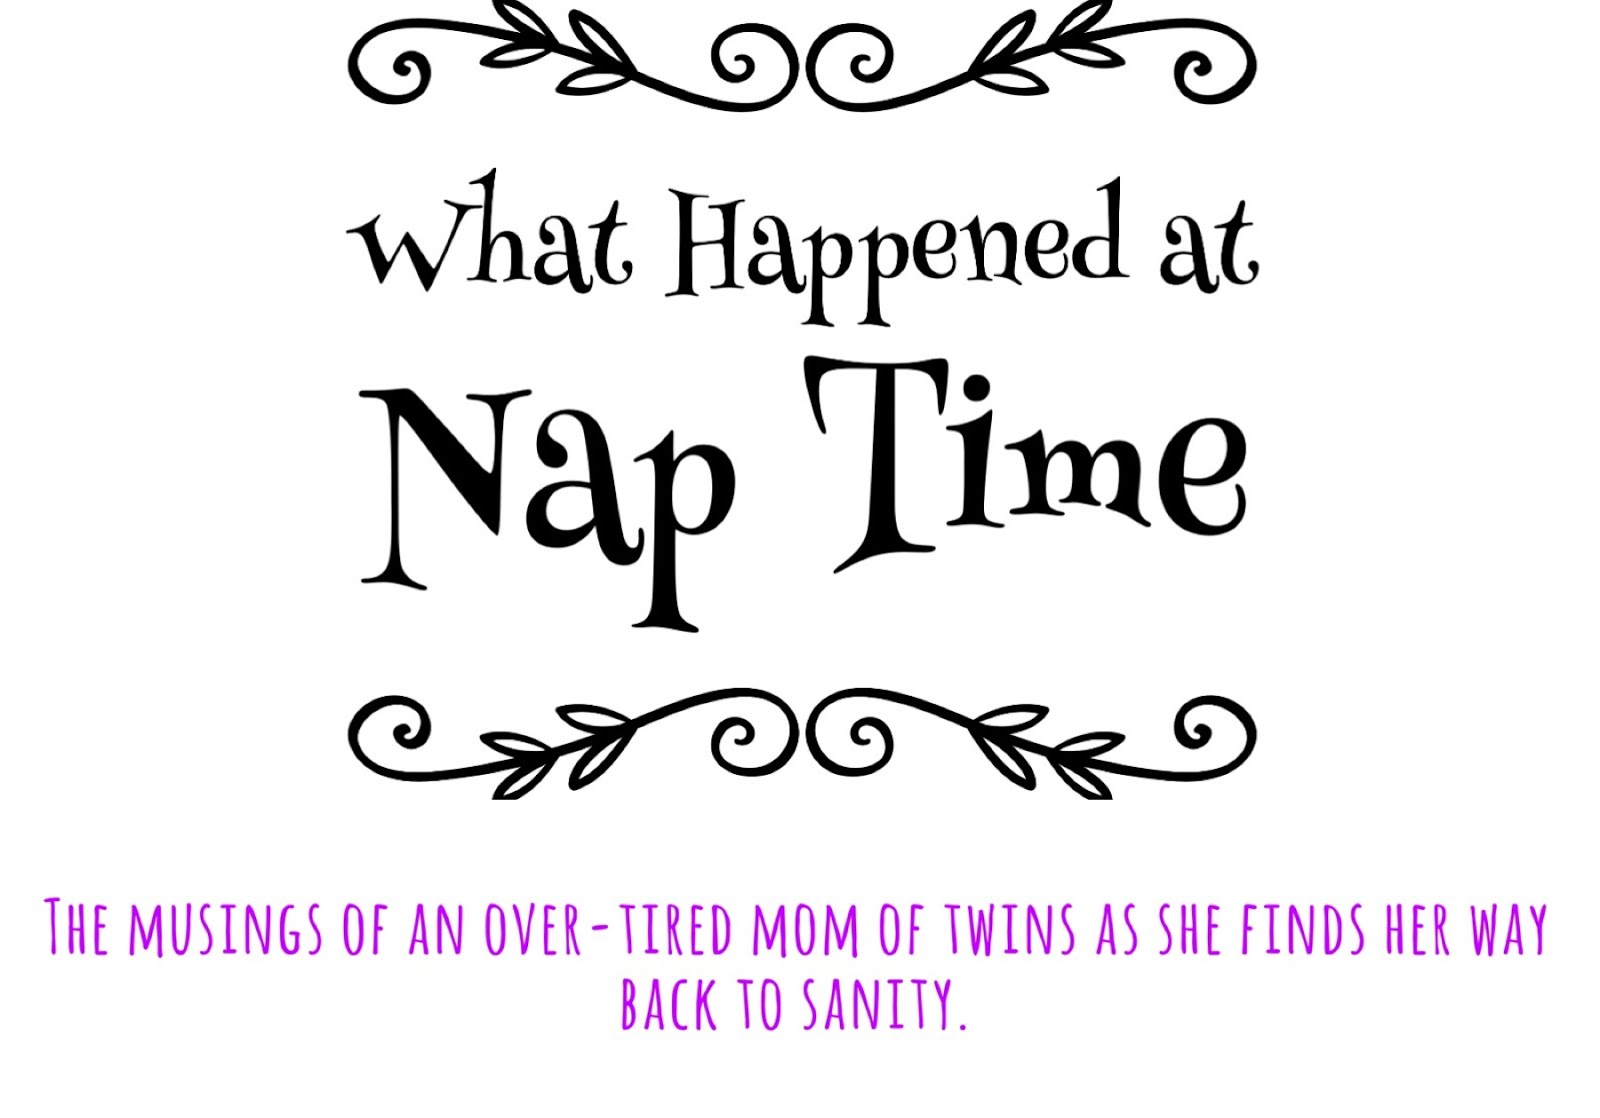 What Happened at Naptime